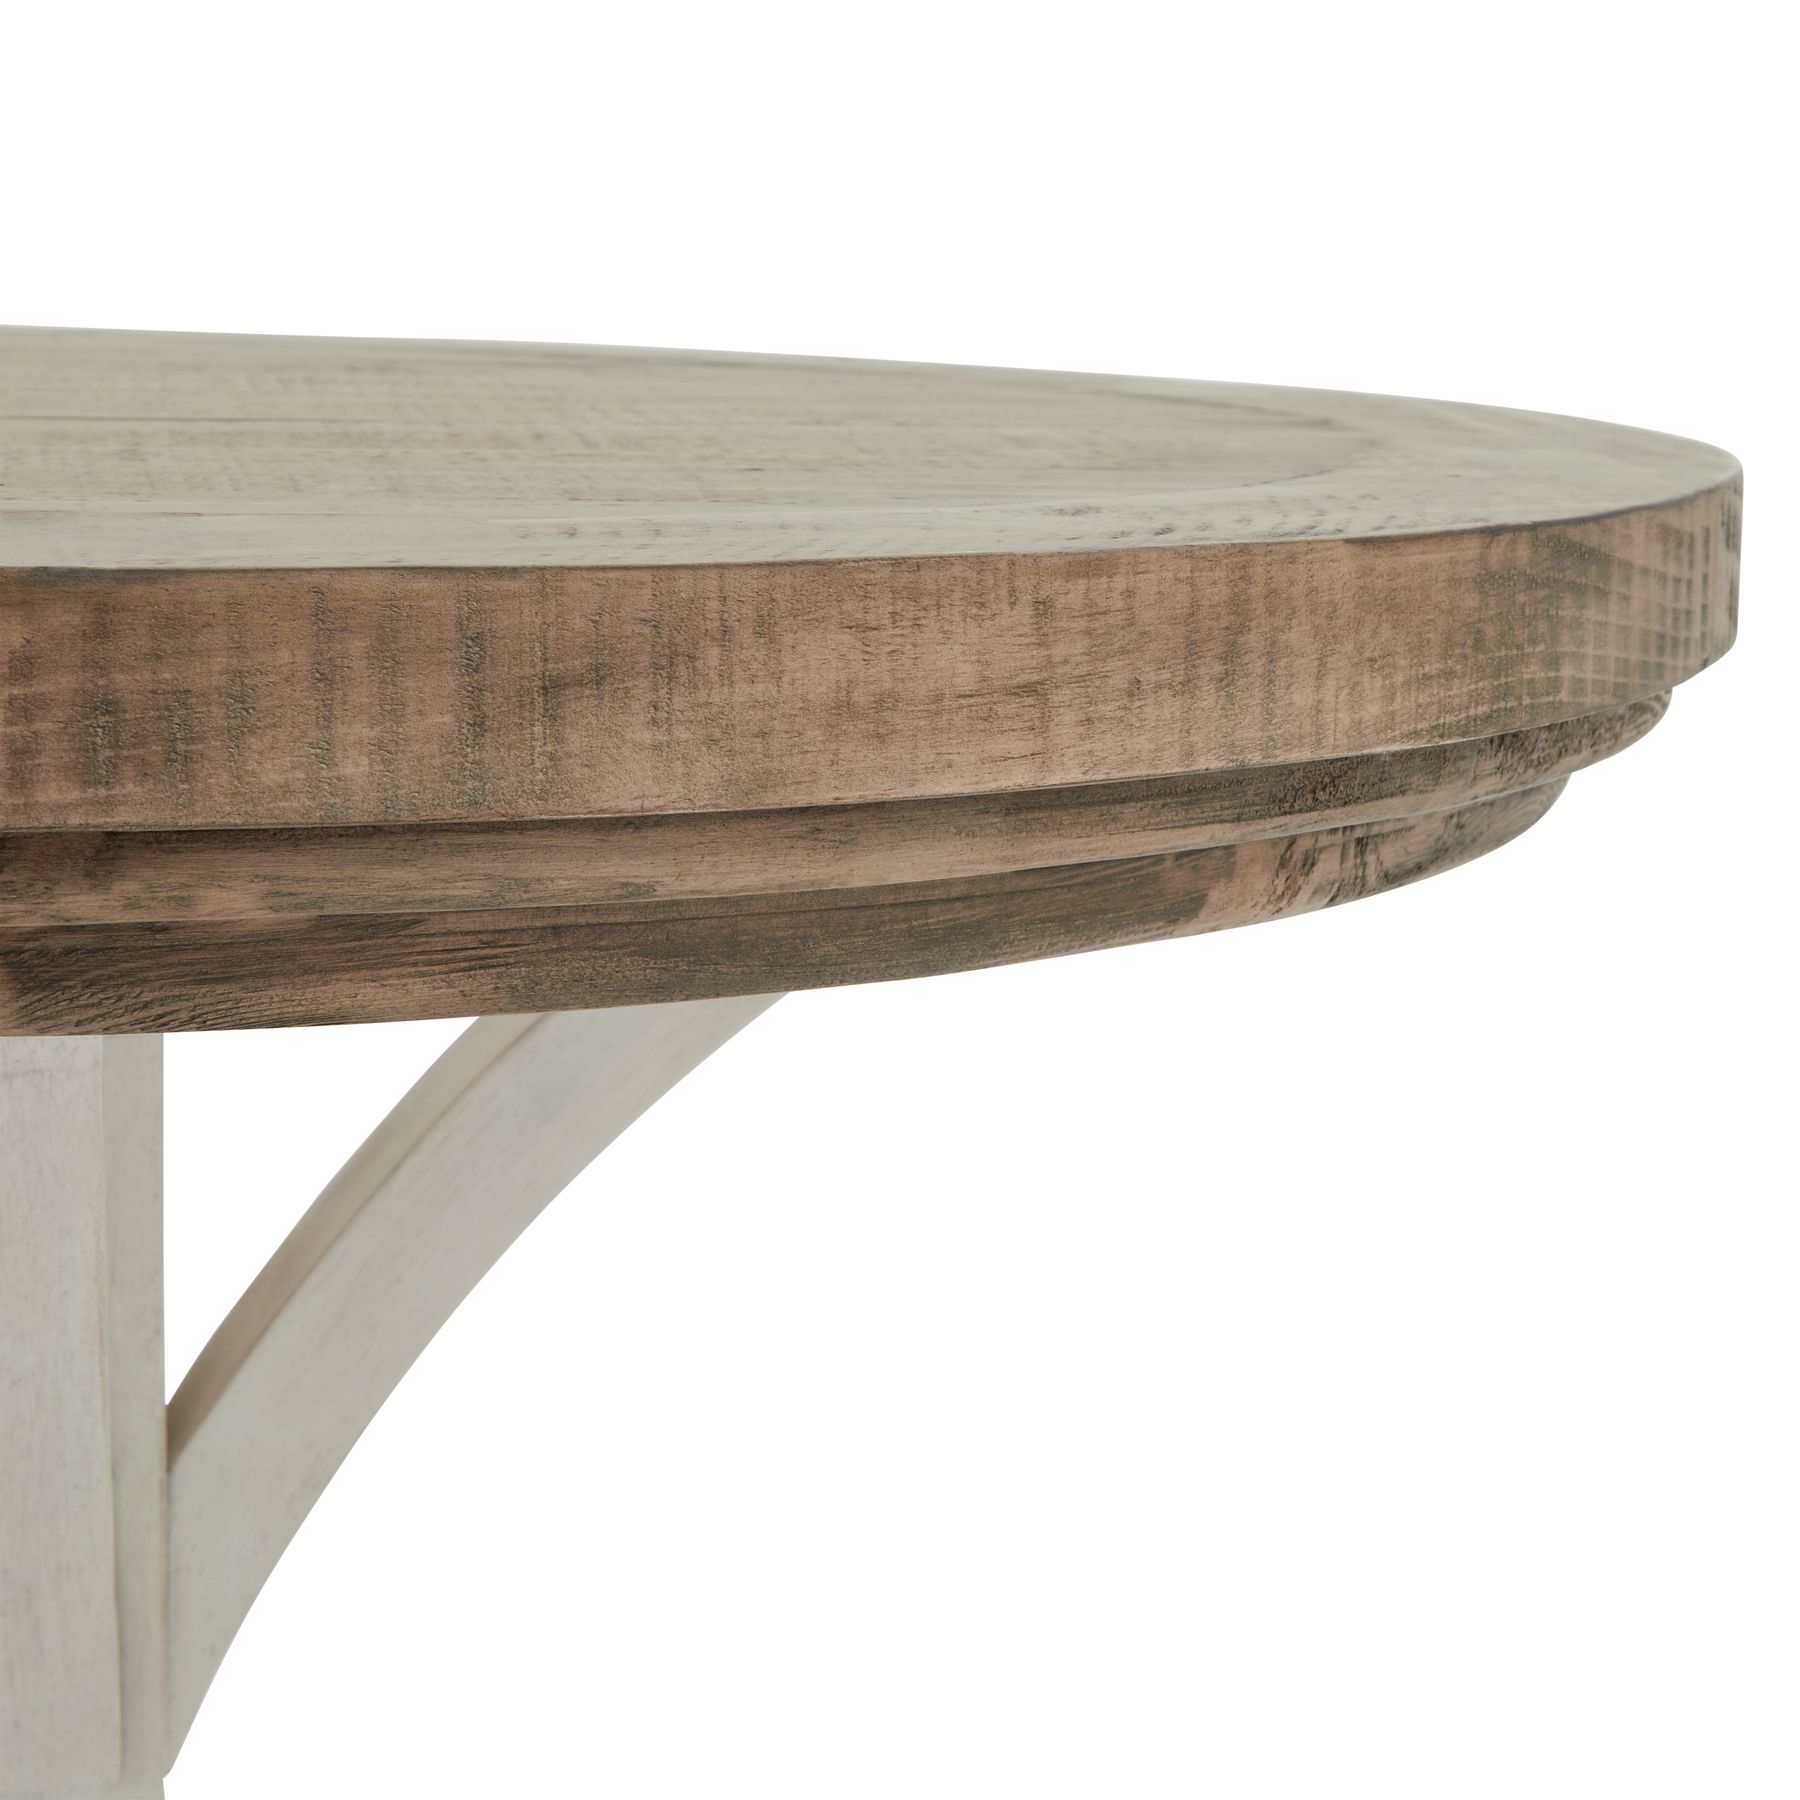 Luna Collection Round Occasional Table - Image 3